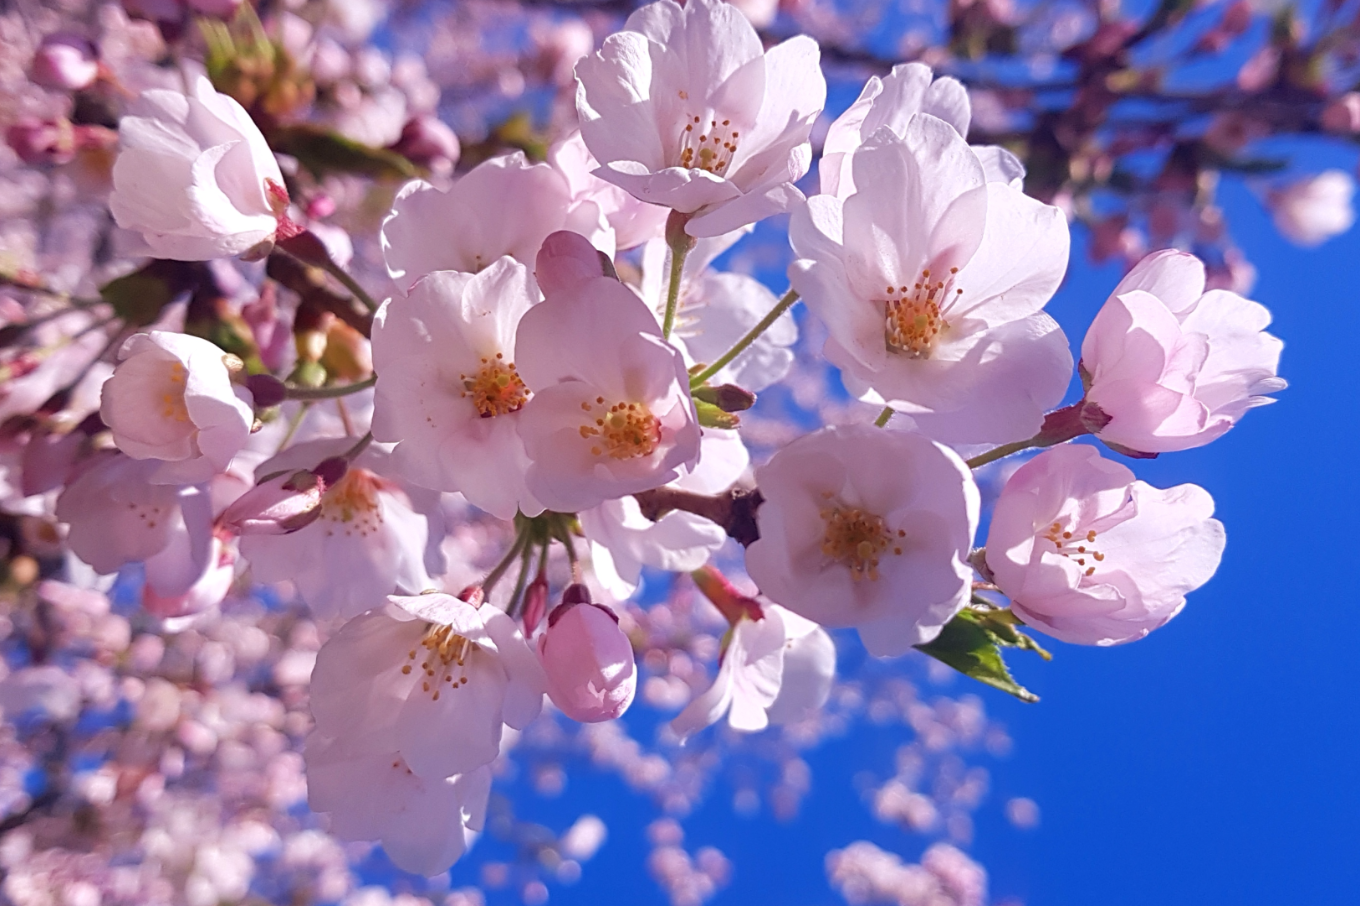 Most stunning Cherry blossom background in all the world – HD Wallpapers for PC, Laptop or Mobile Phone